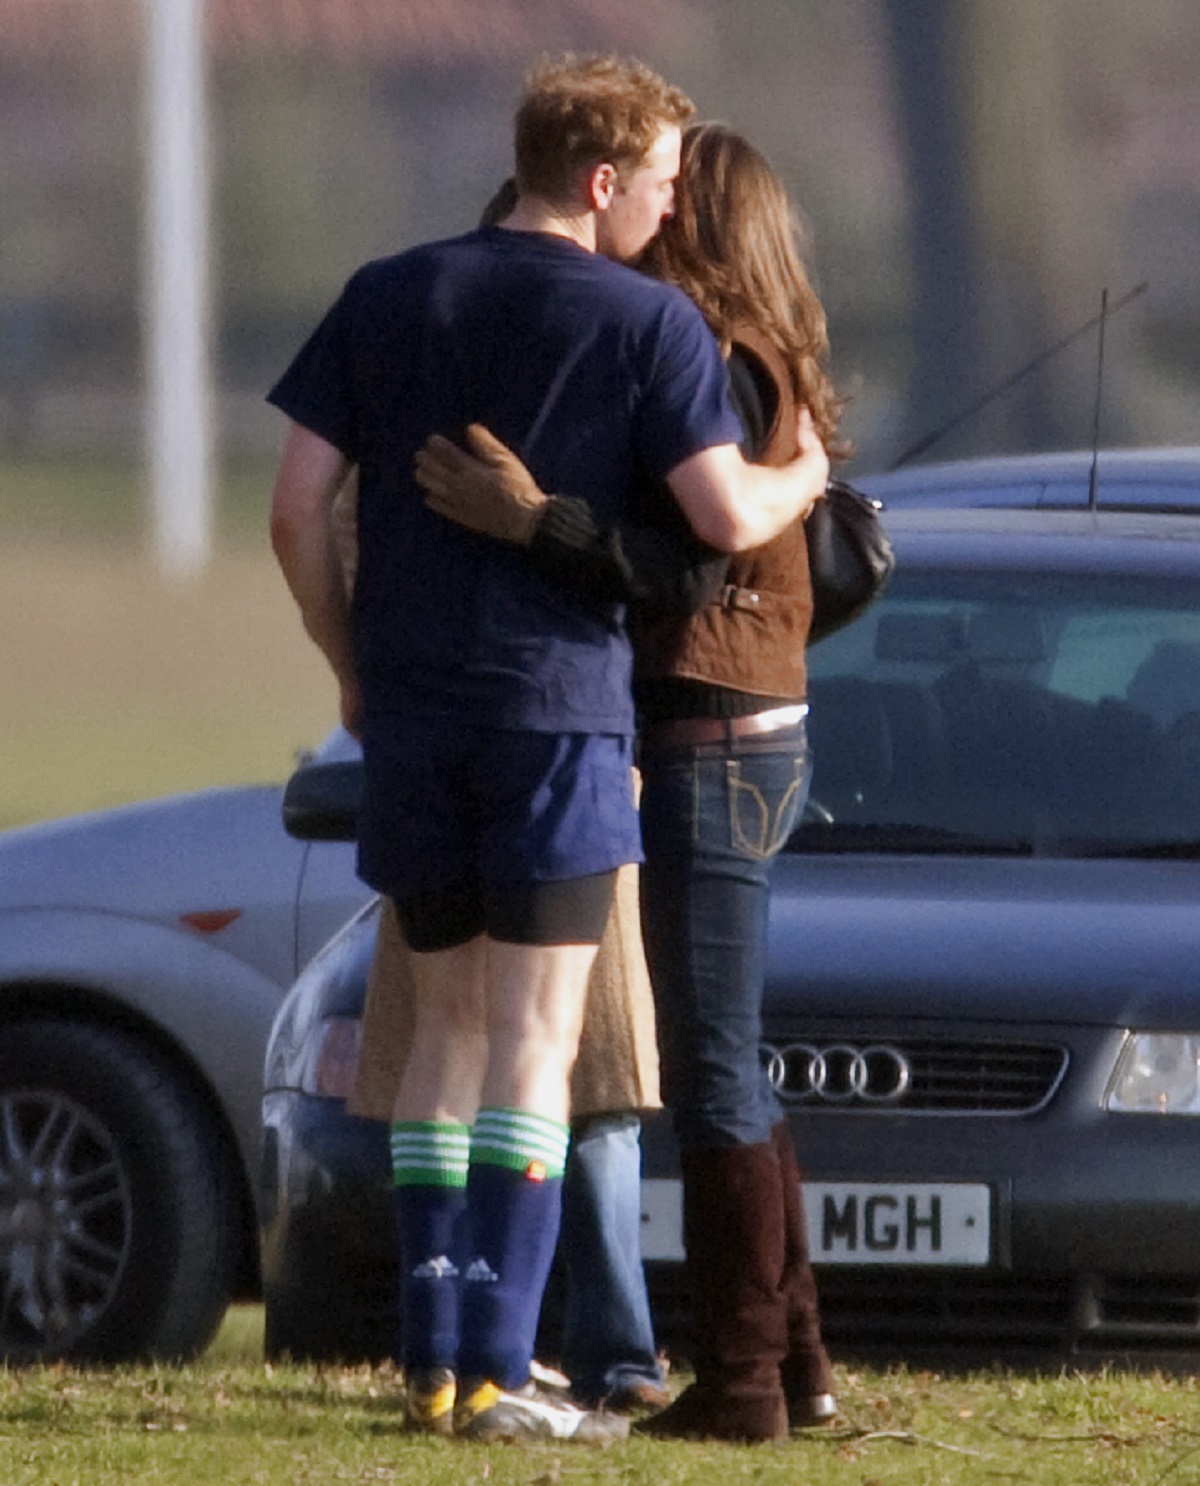 Prince William kisses Kate Middleton after playing the Field Game in an old boys match at Eton College